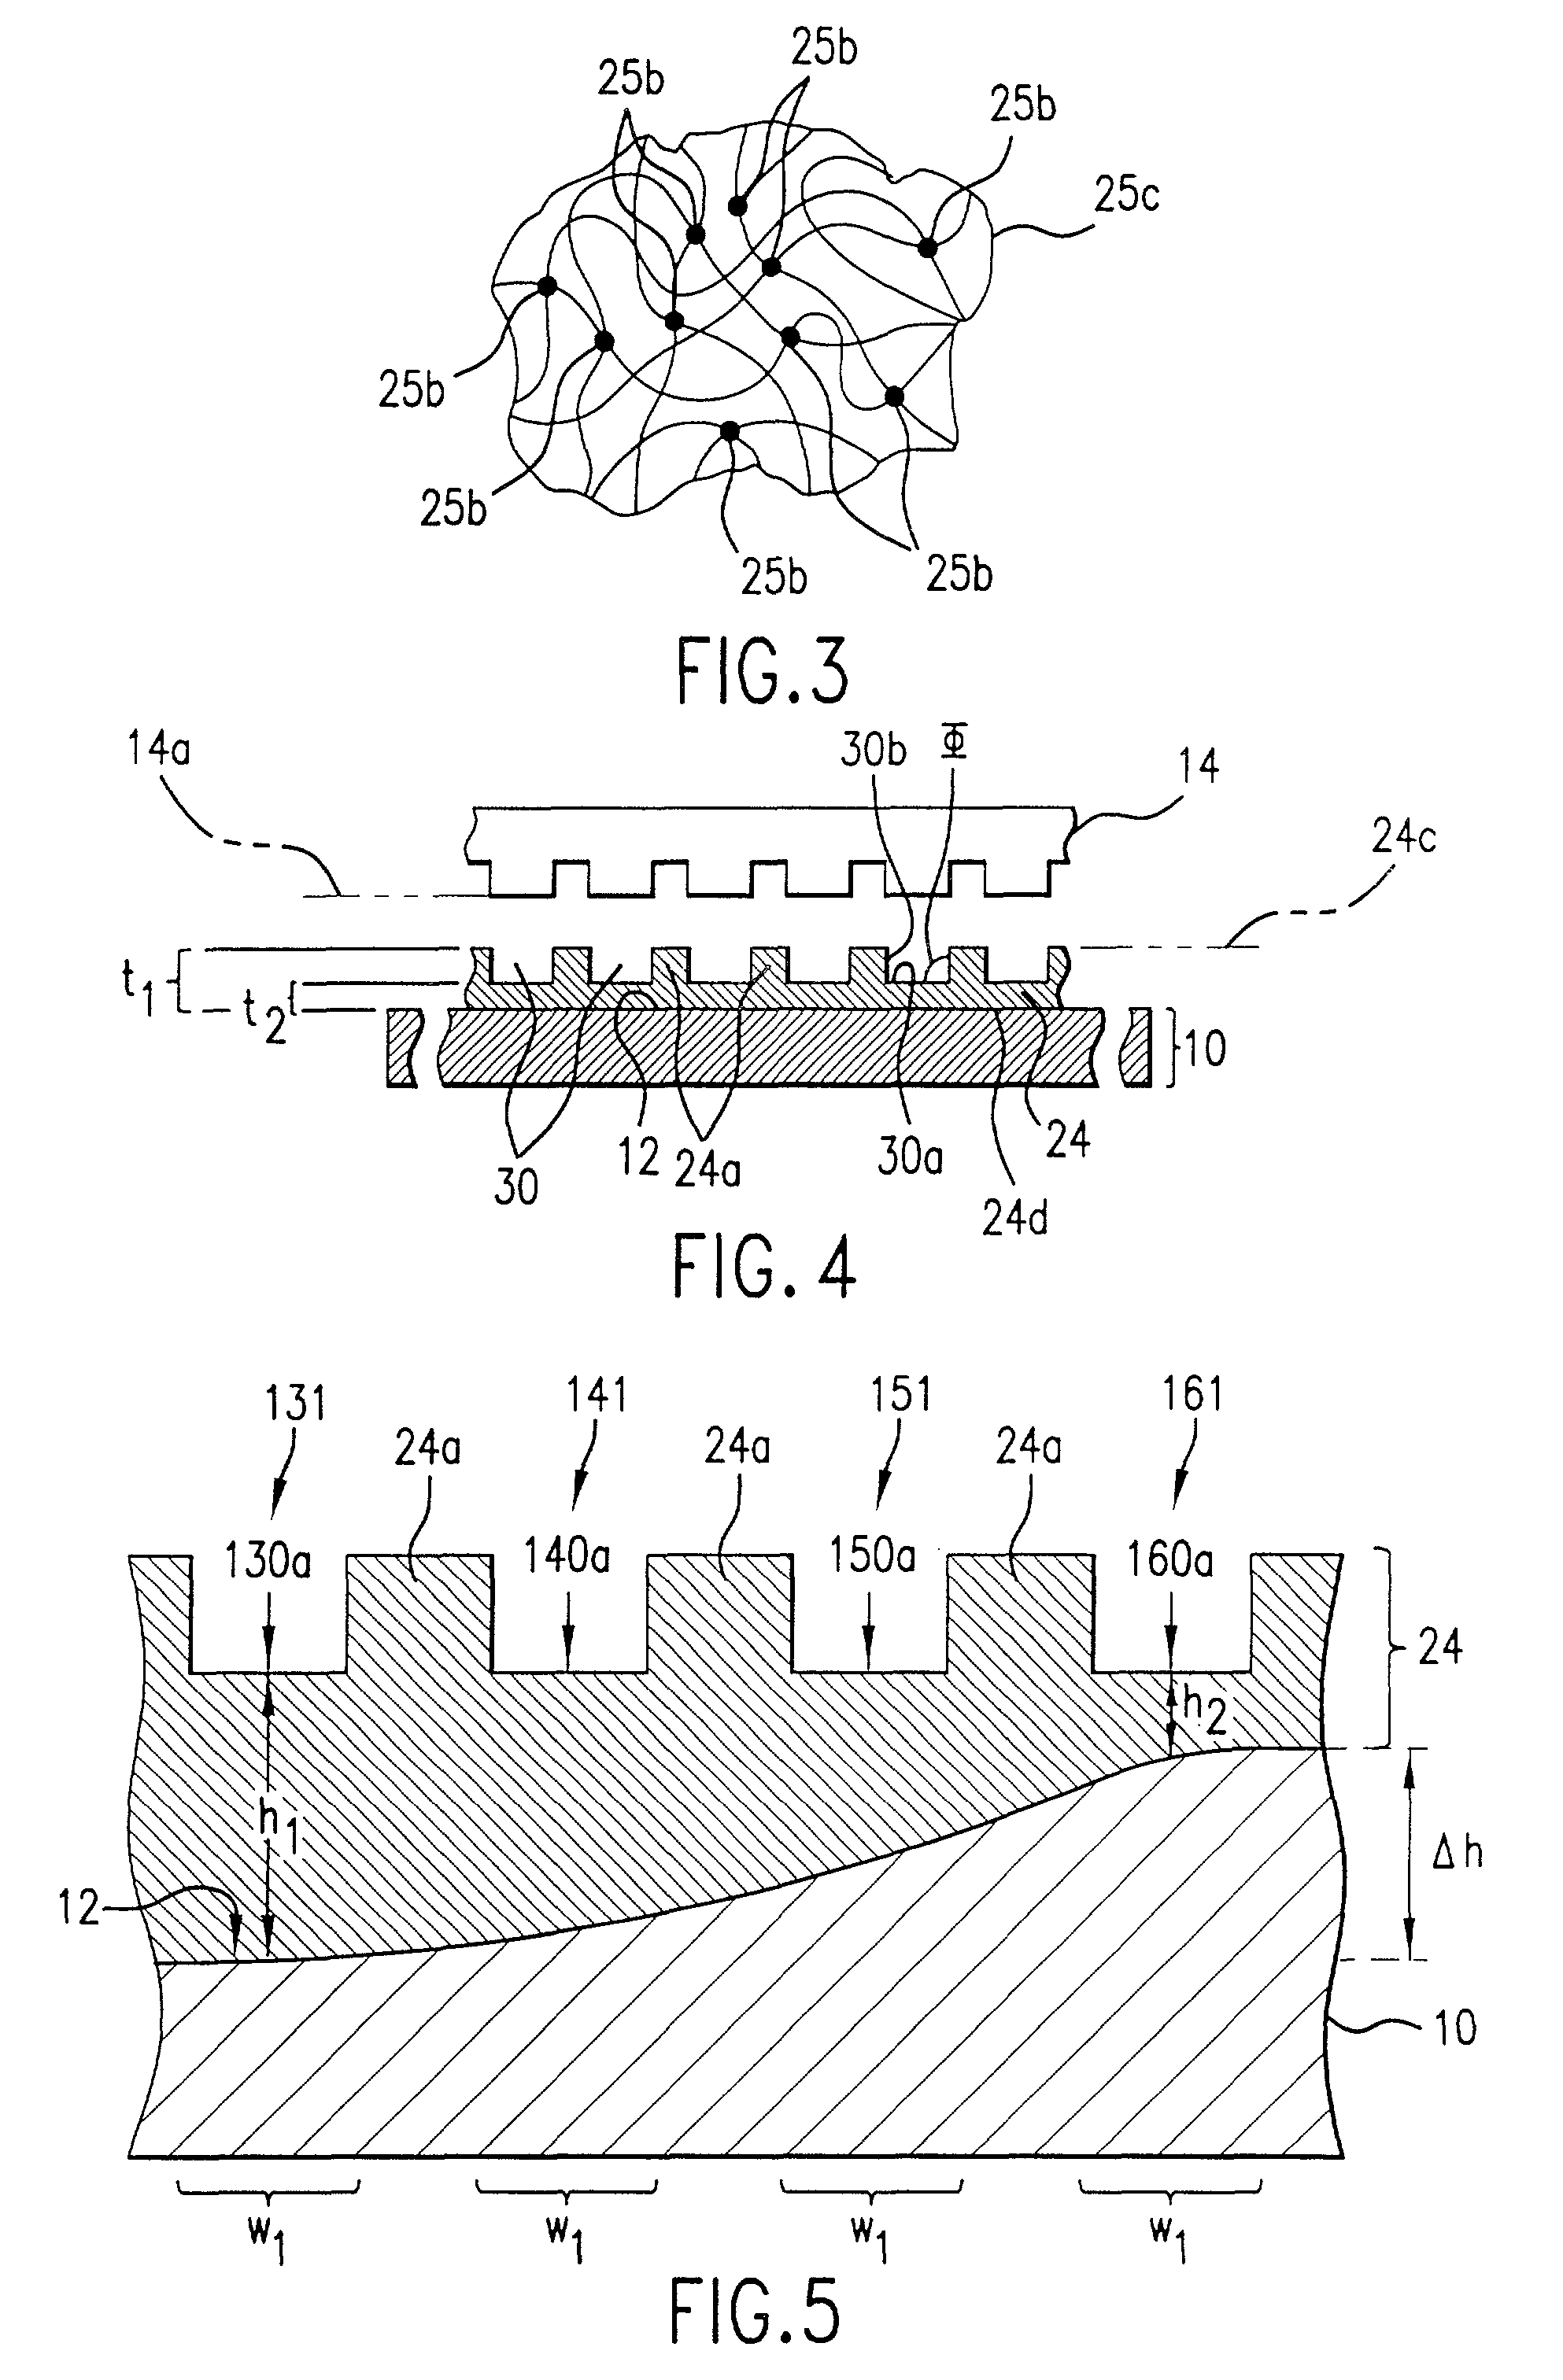 Method to arrange features on a substrate to replicate features having minimal dimensional variability